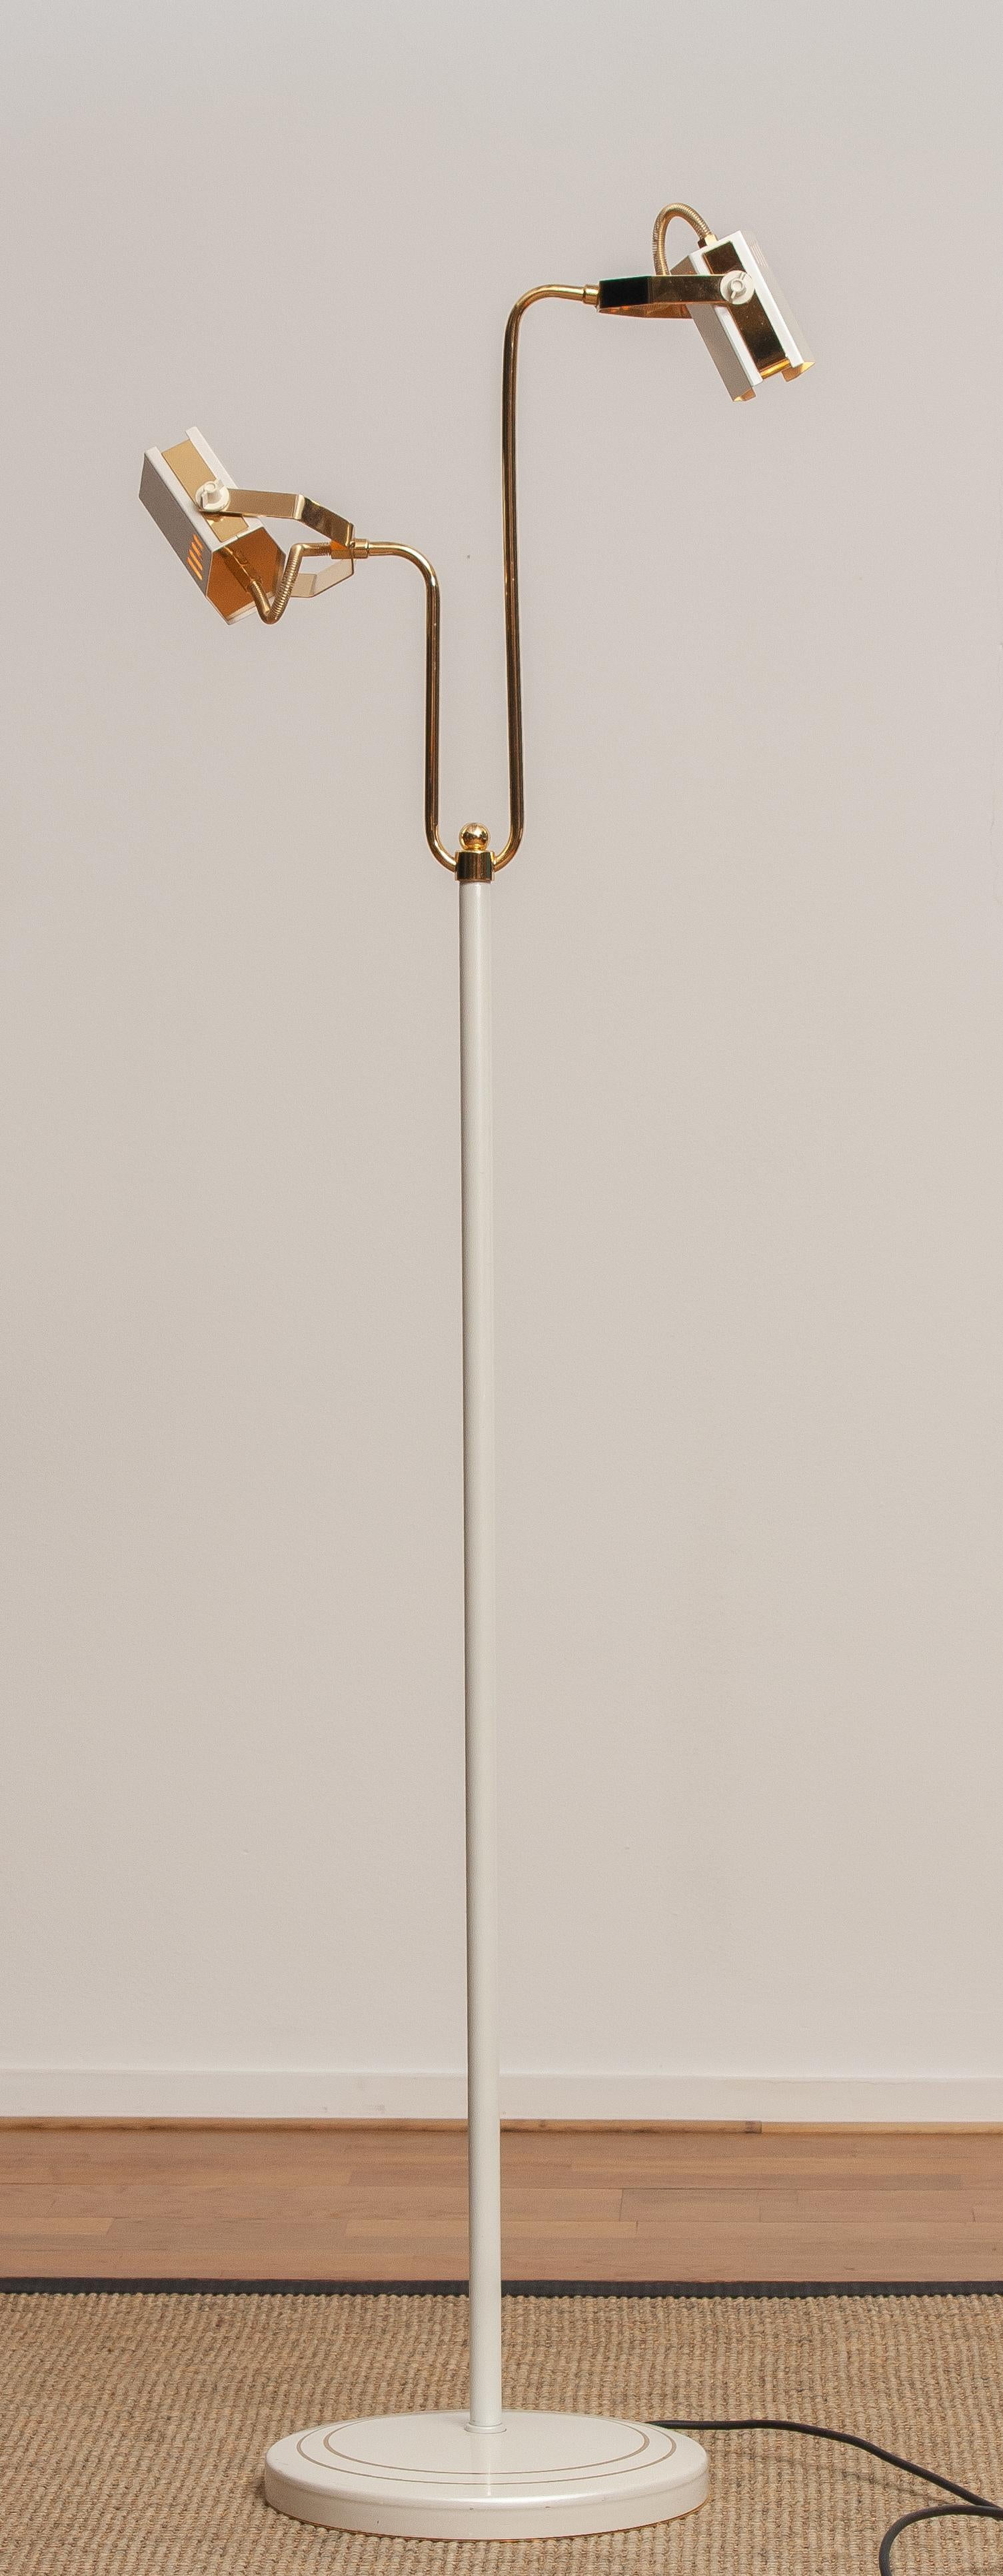 Beautiful 1980s design halogen floor lamp. 
This lamp is made of white-pearl lacquered metal and brass.
It is in a good and working condition, consistent with age and use.